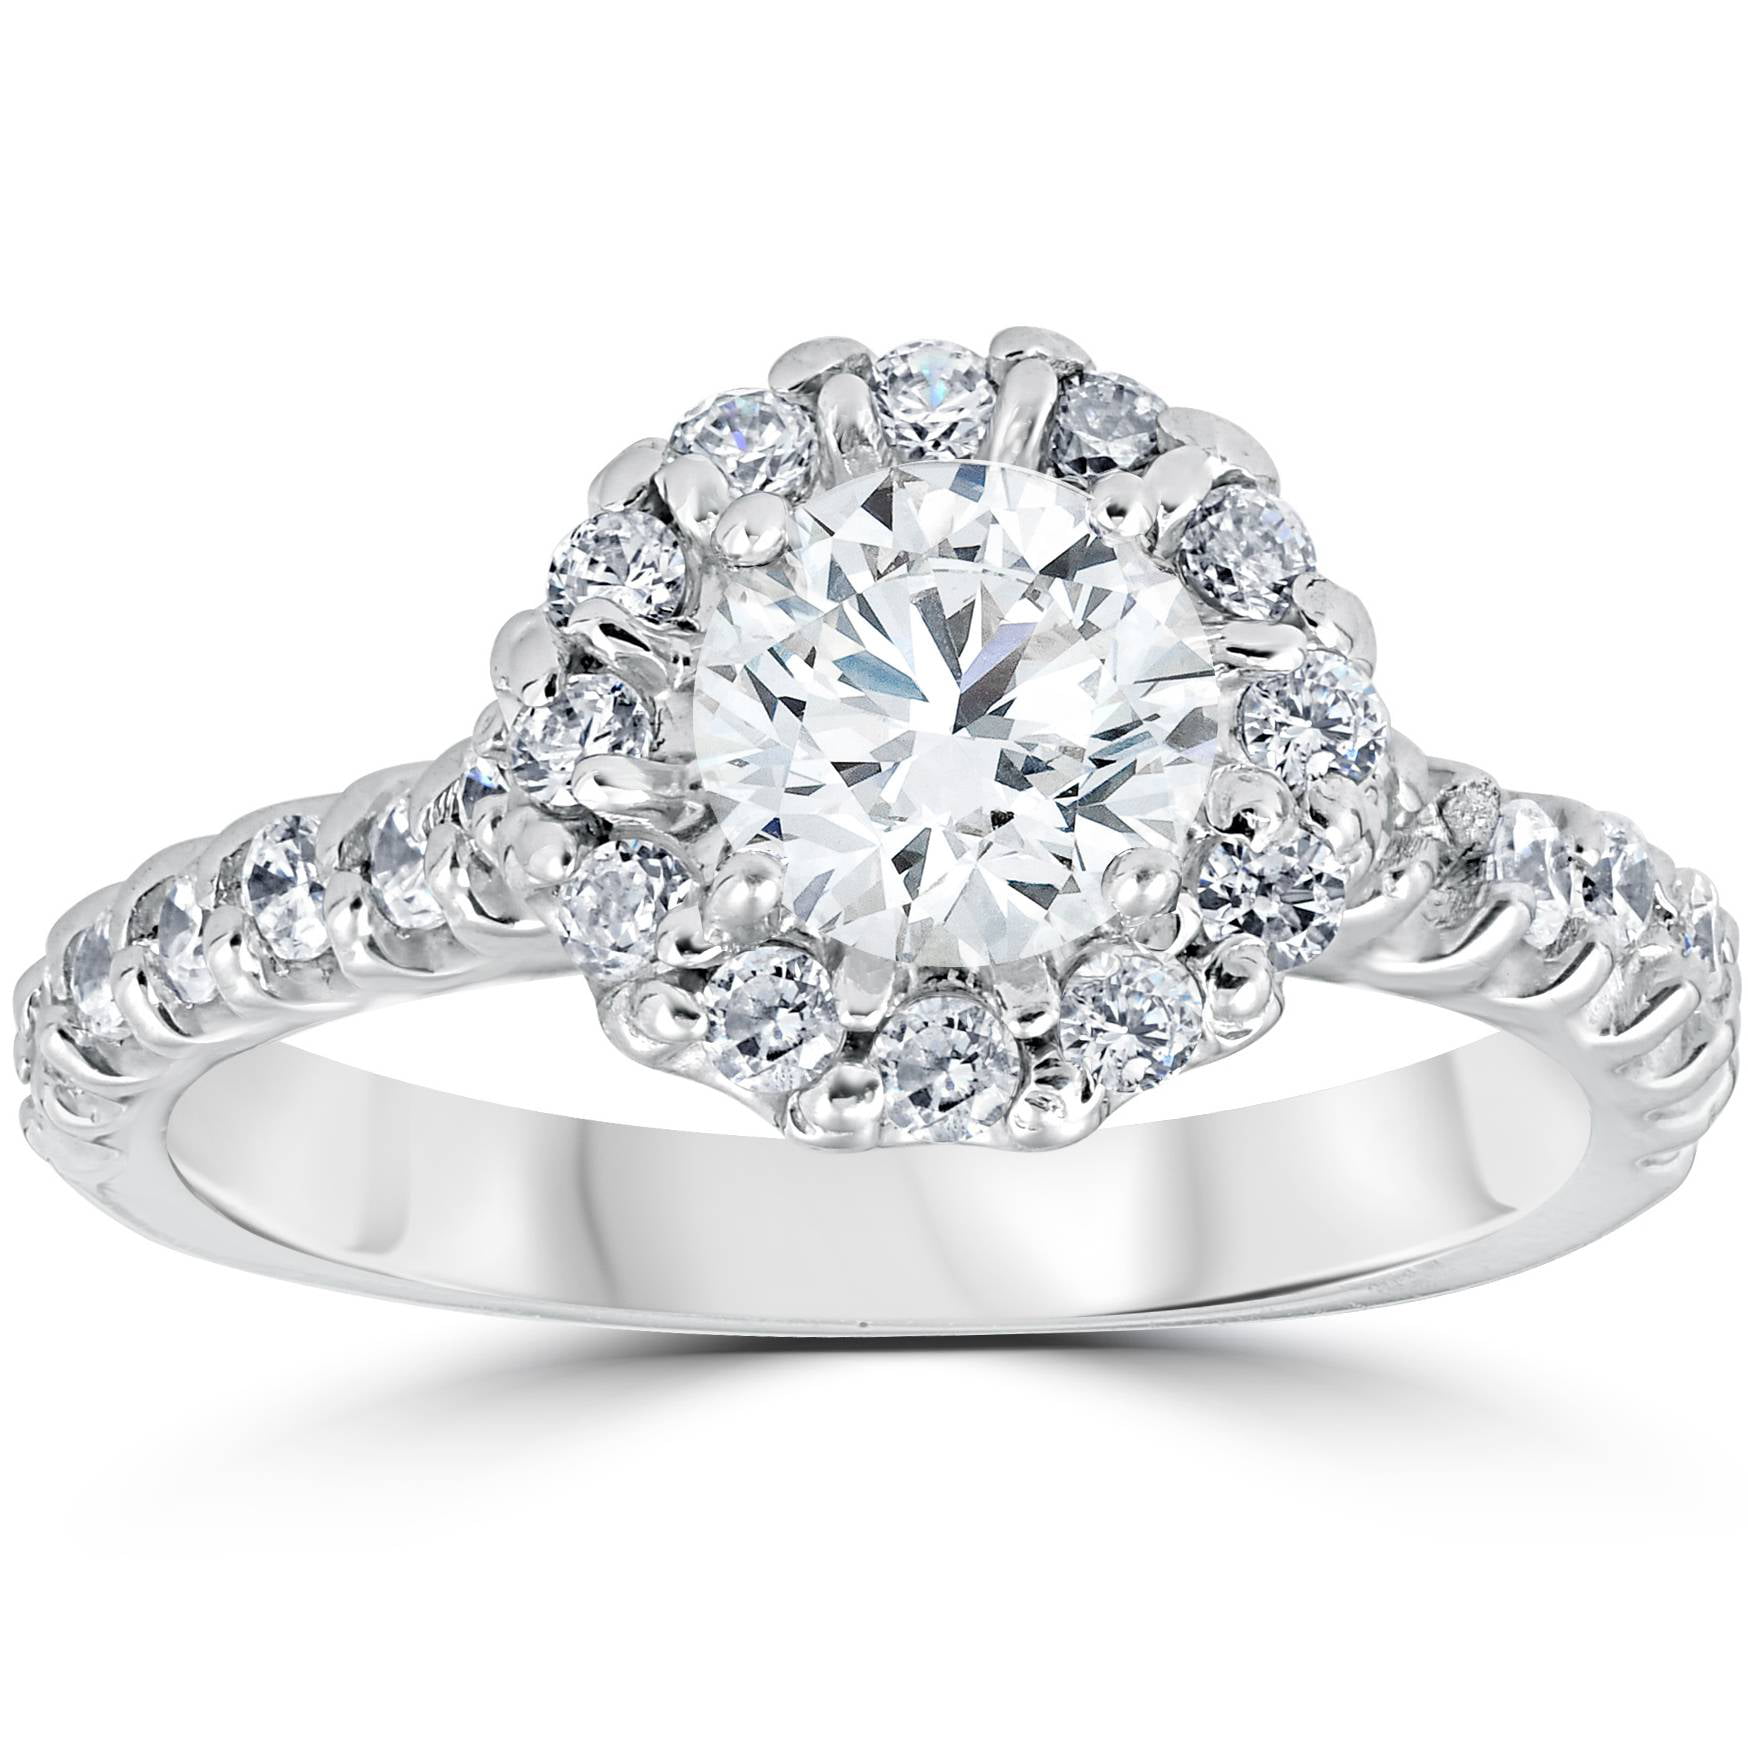 1/2ctw Diamond Halo Engagement Ring in 10k White Gold 